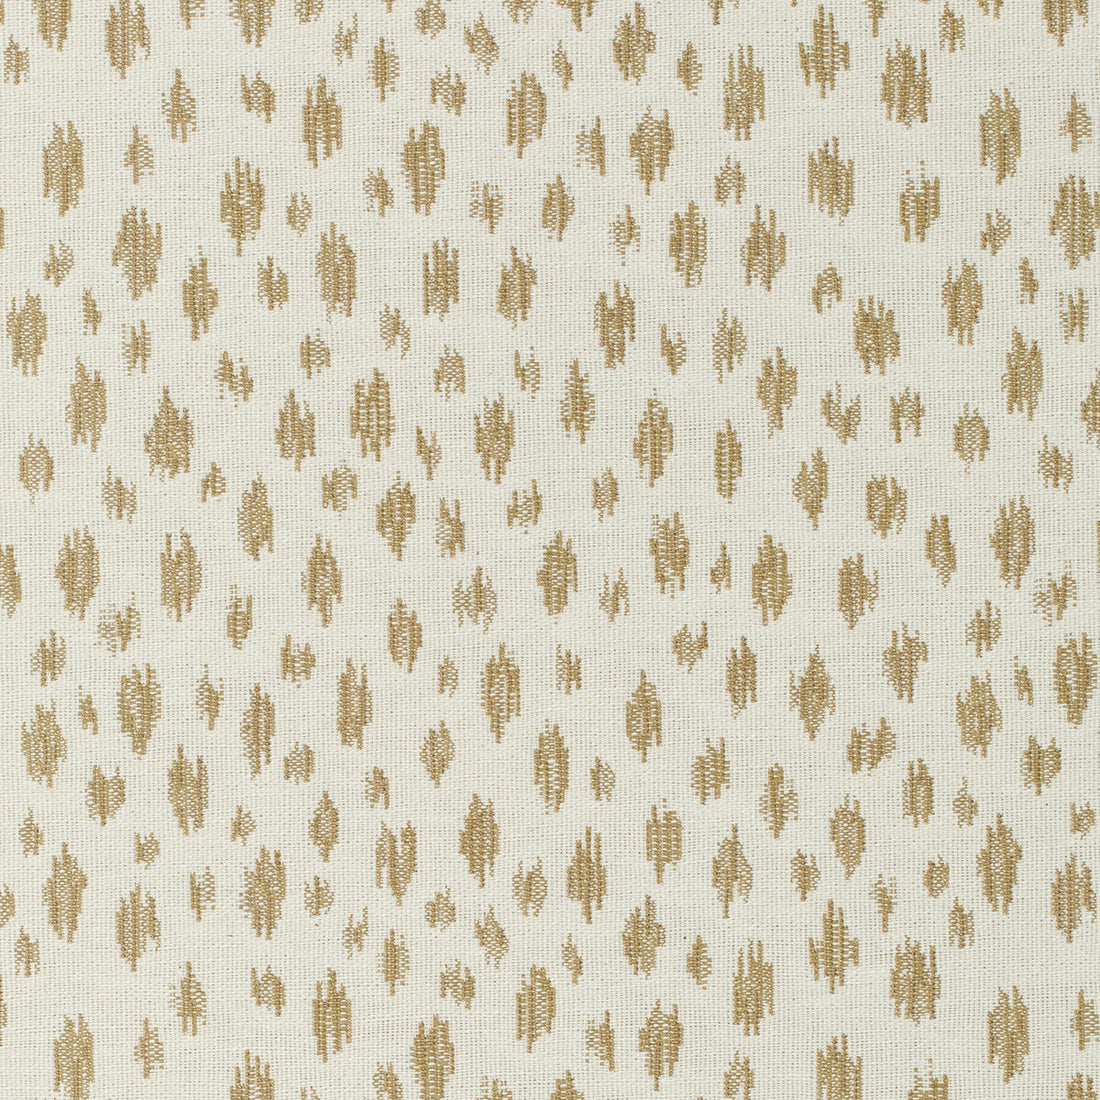 Honfleur Woven fabric in beige color - pattern 8020112.16.0 - by Brunschwig &amp; Fils in the Granville Weaves collection